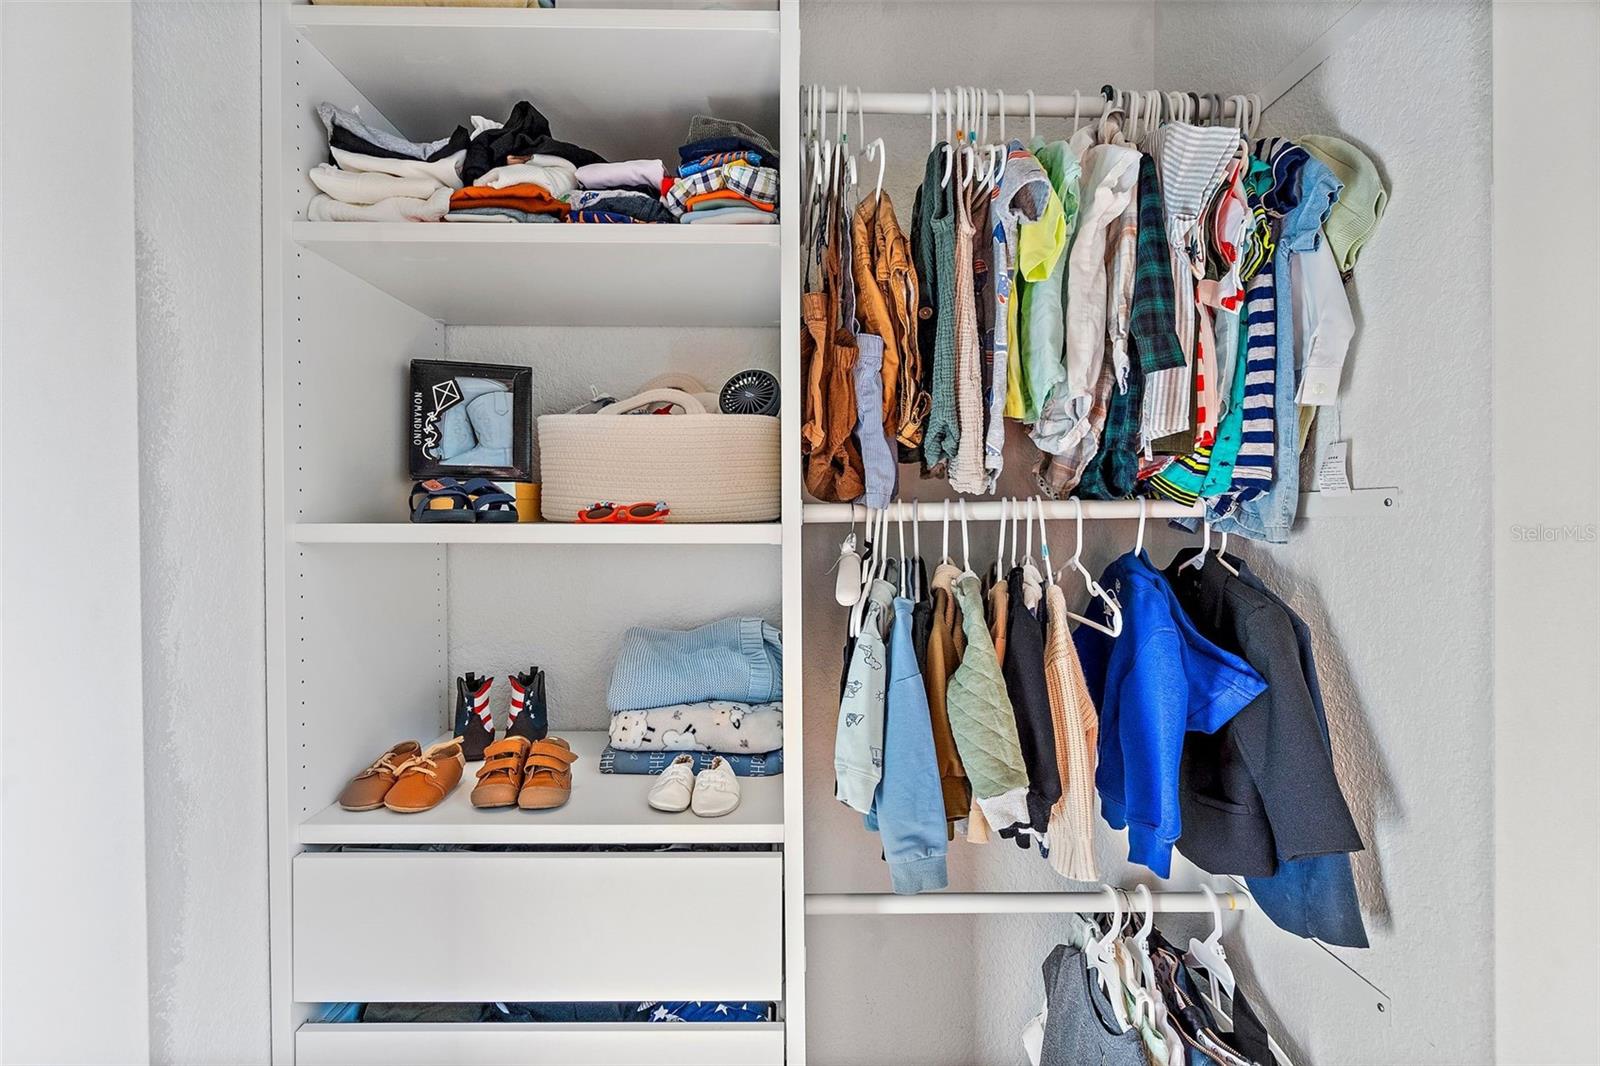 Built in reach in closet systems in every bedroom closet